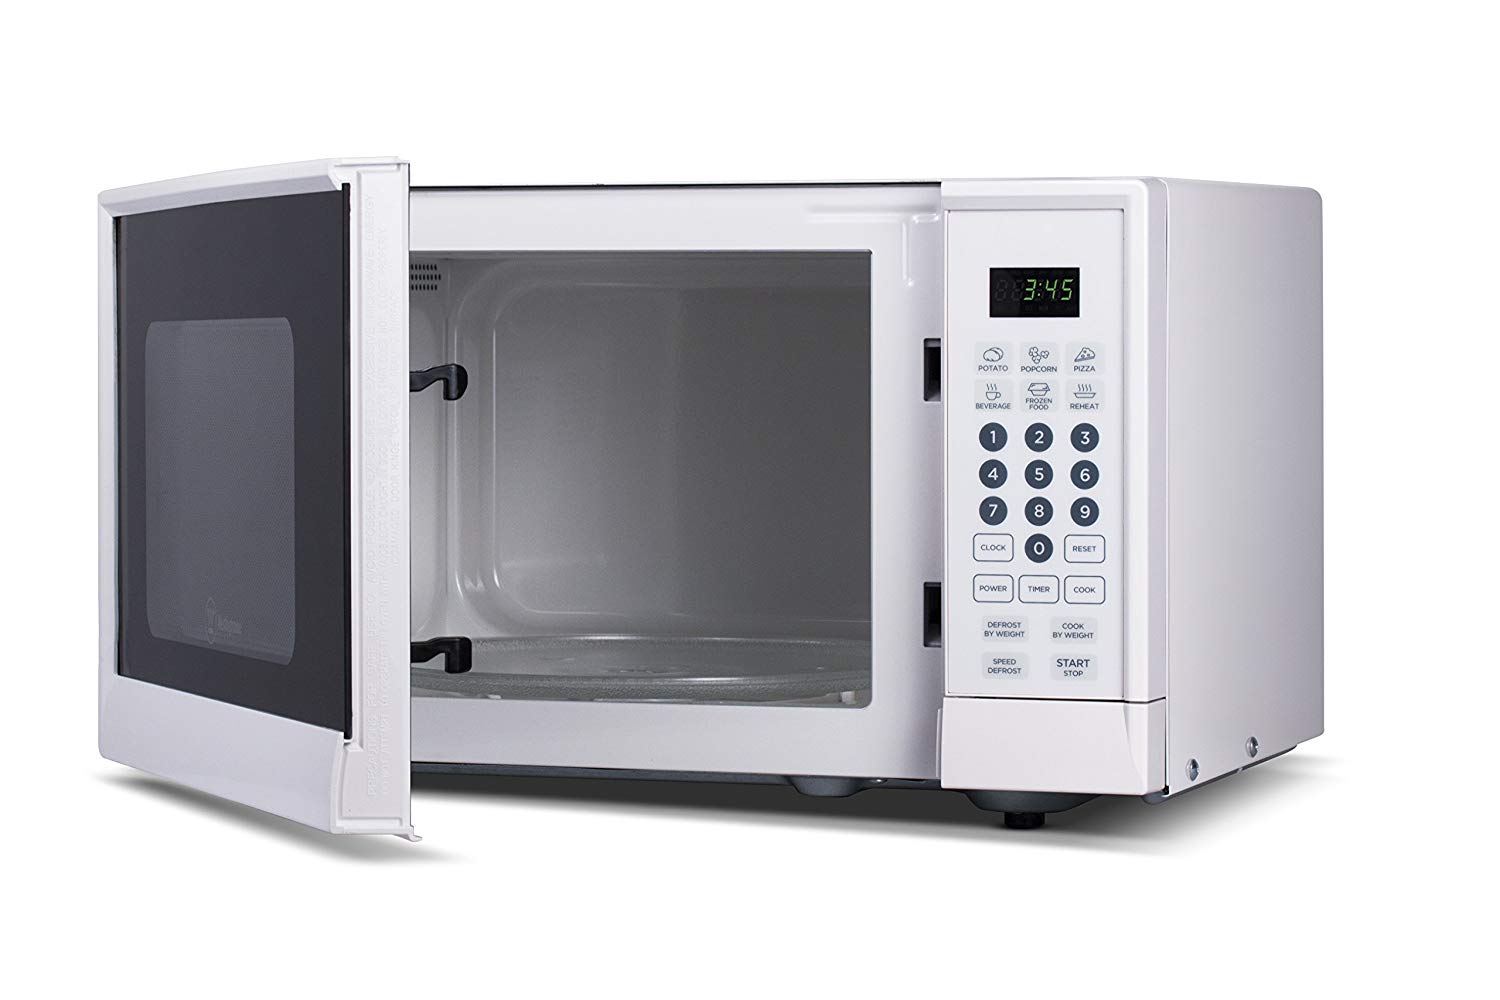 Westinghouse WCM990W 0.9 Cubic Feet 900 Watt Counter Top Microwave Oven